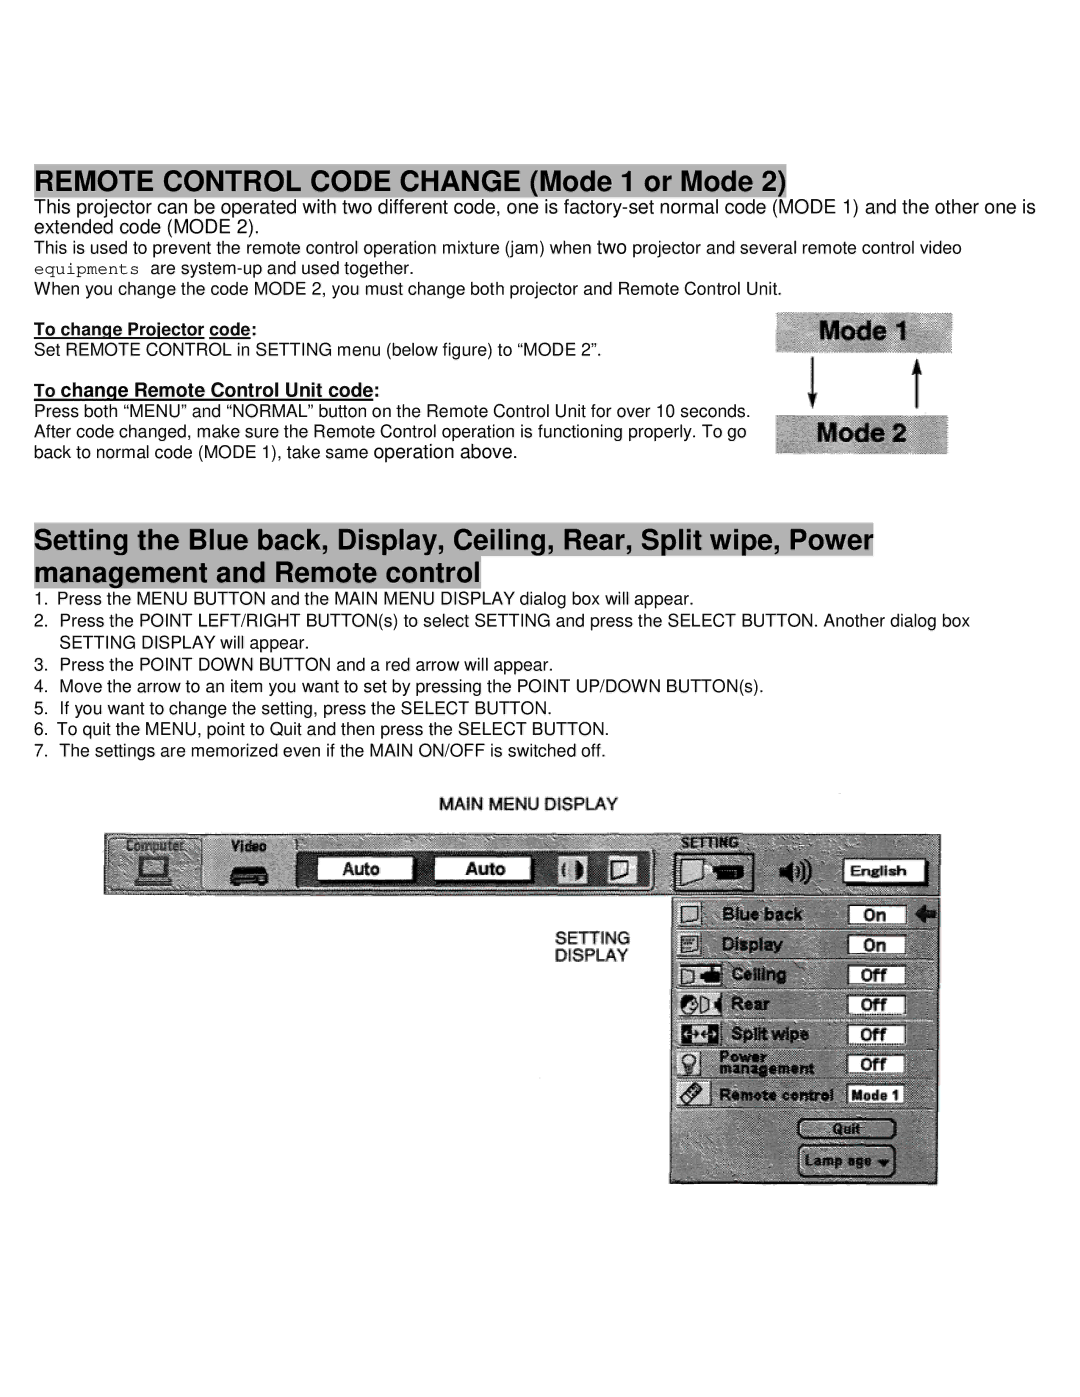 Eiki LC-X990 instruction manual Remote Control Code Change Mode 1 or Mode 